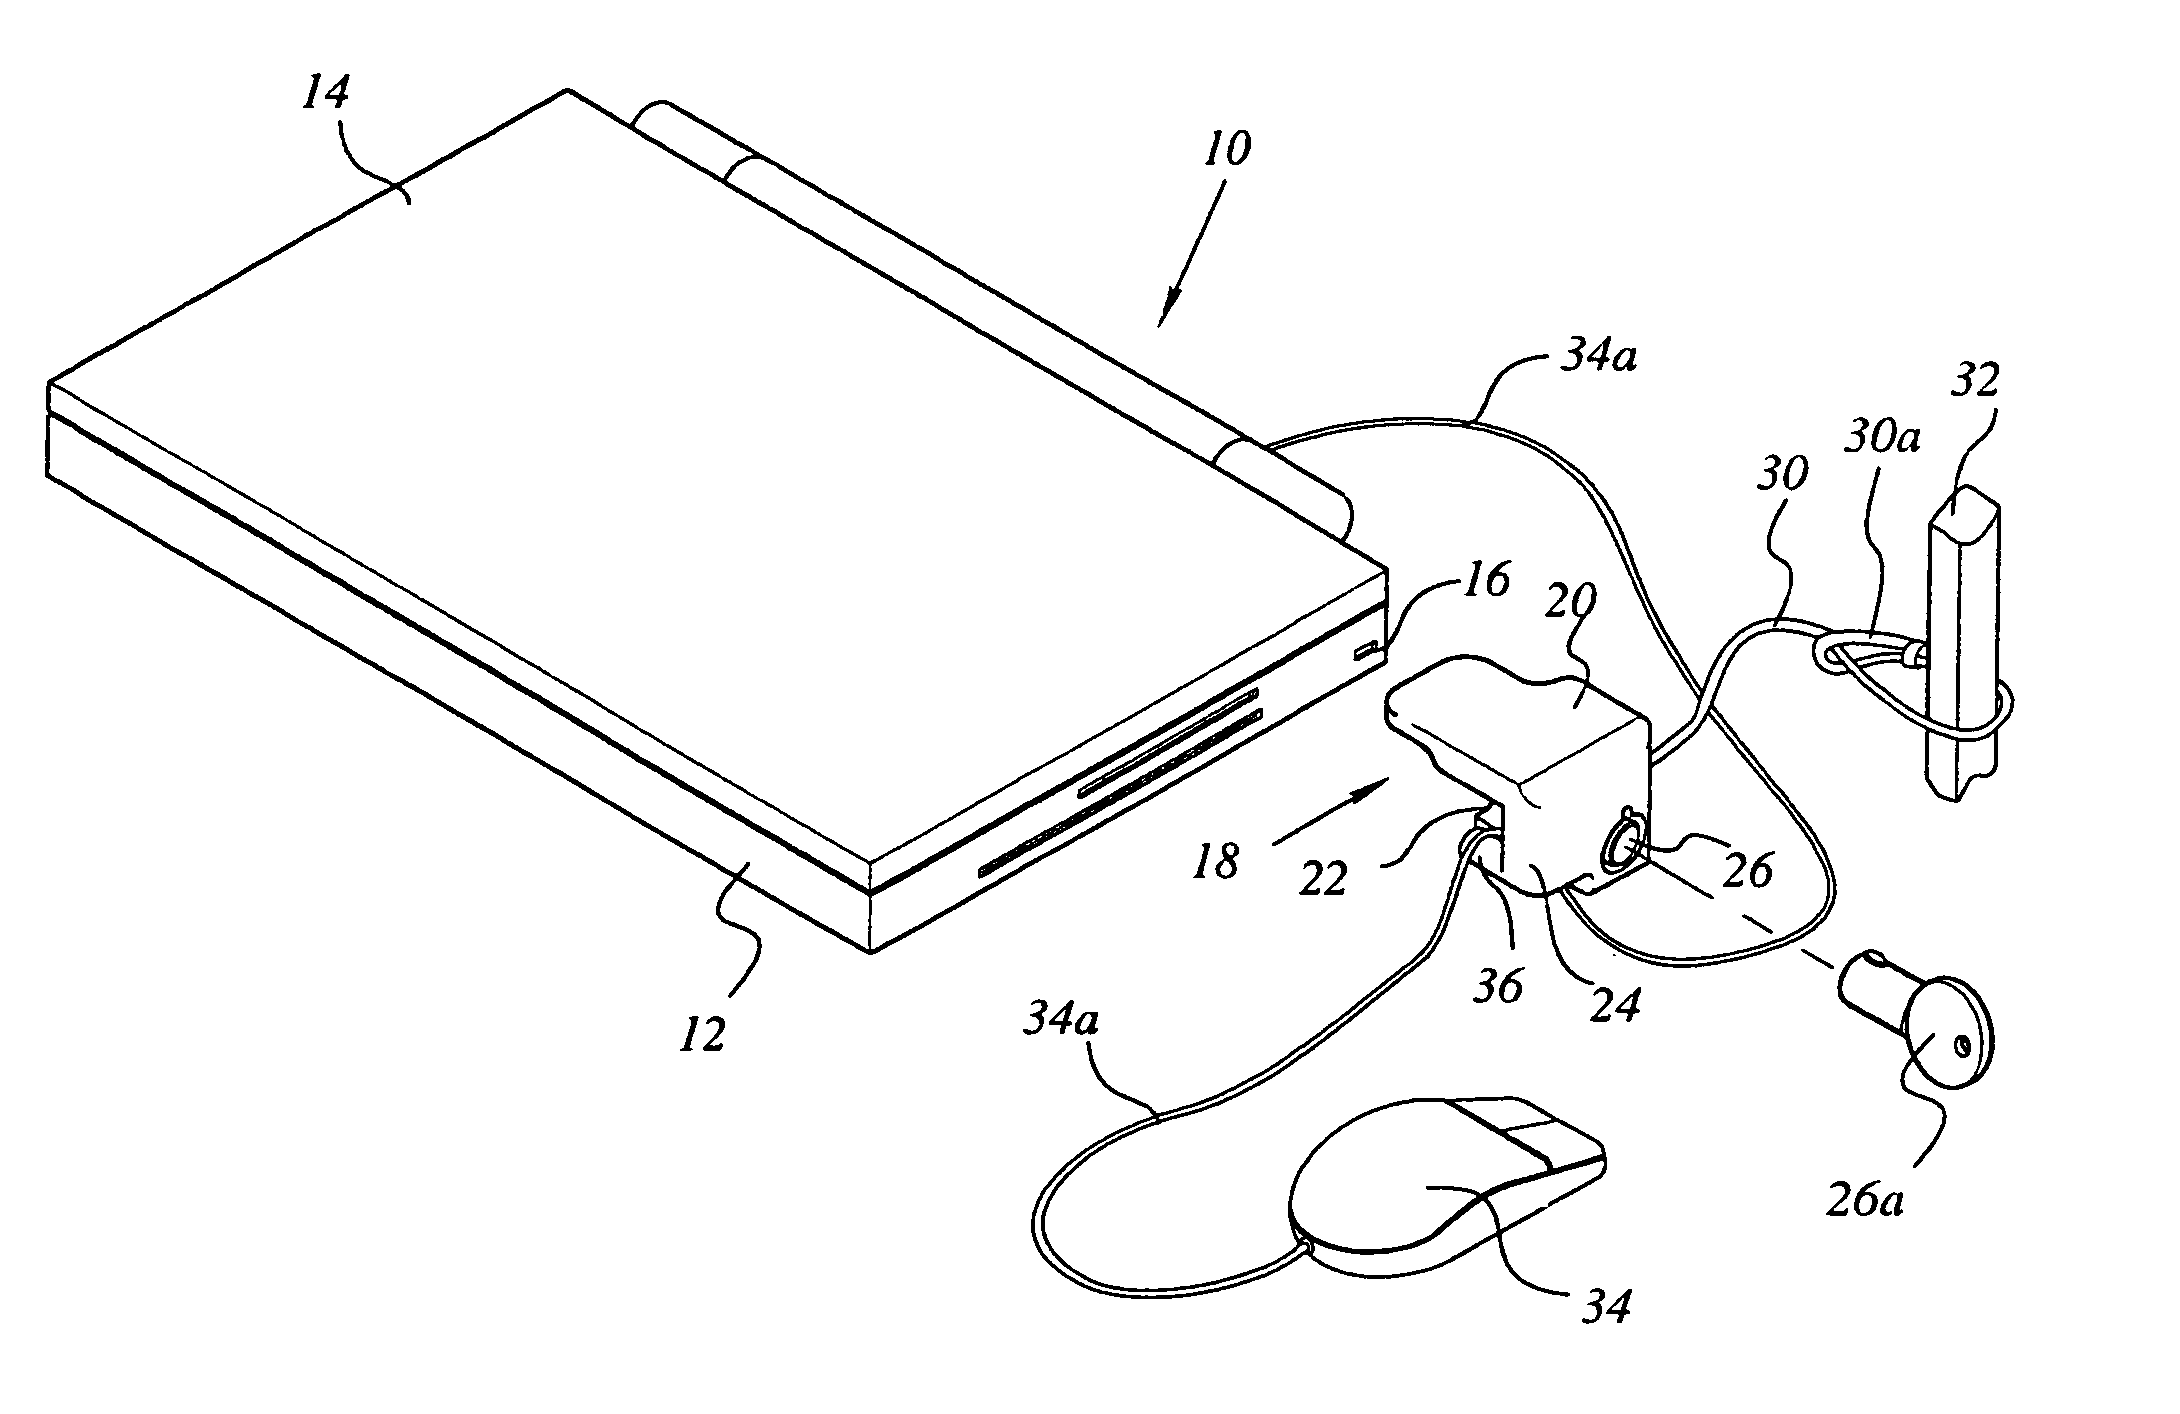 Anti-theft device for portable computers